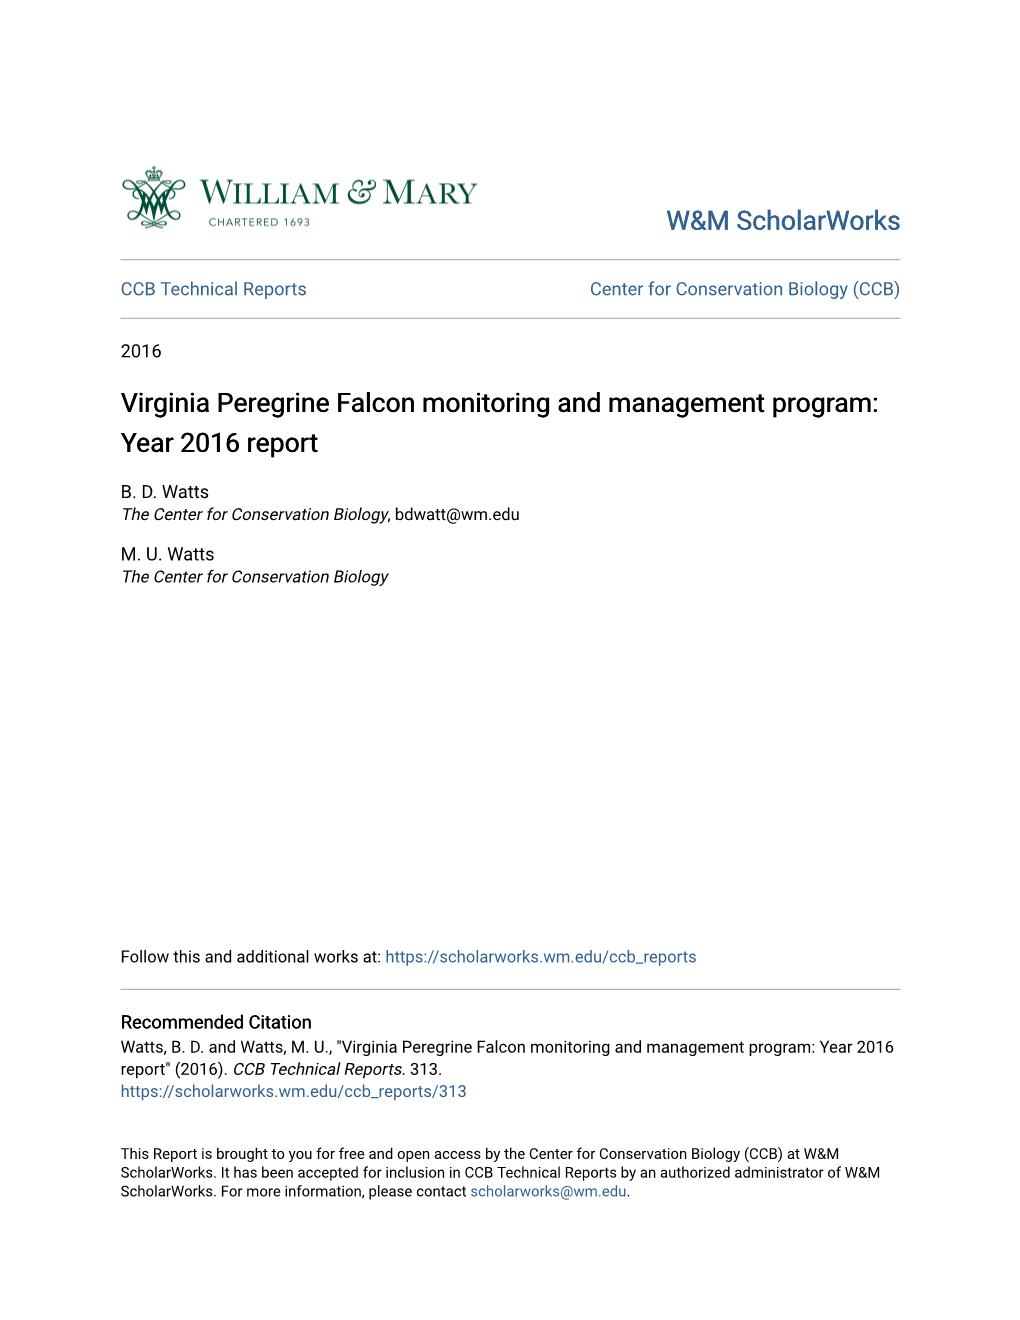 Virginia Peregrine Falcon Monitoring and Management Program: Year 2016 Report